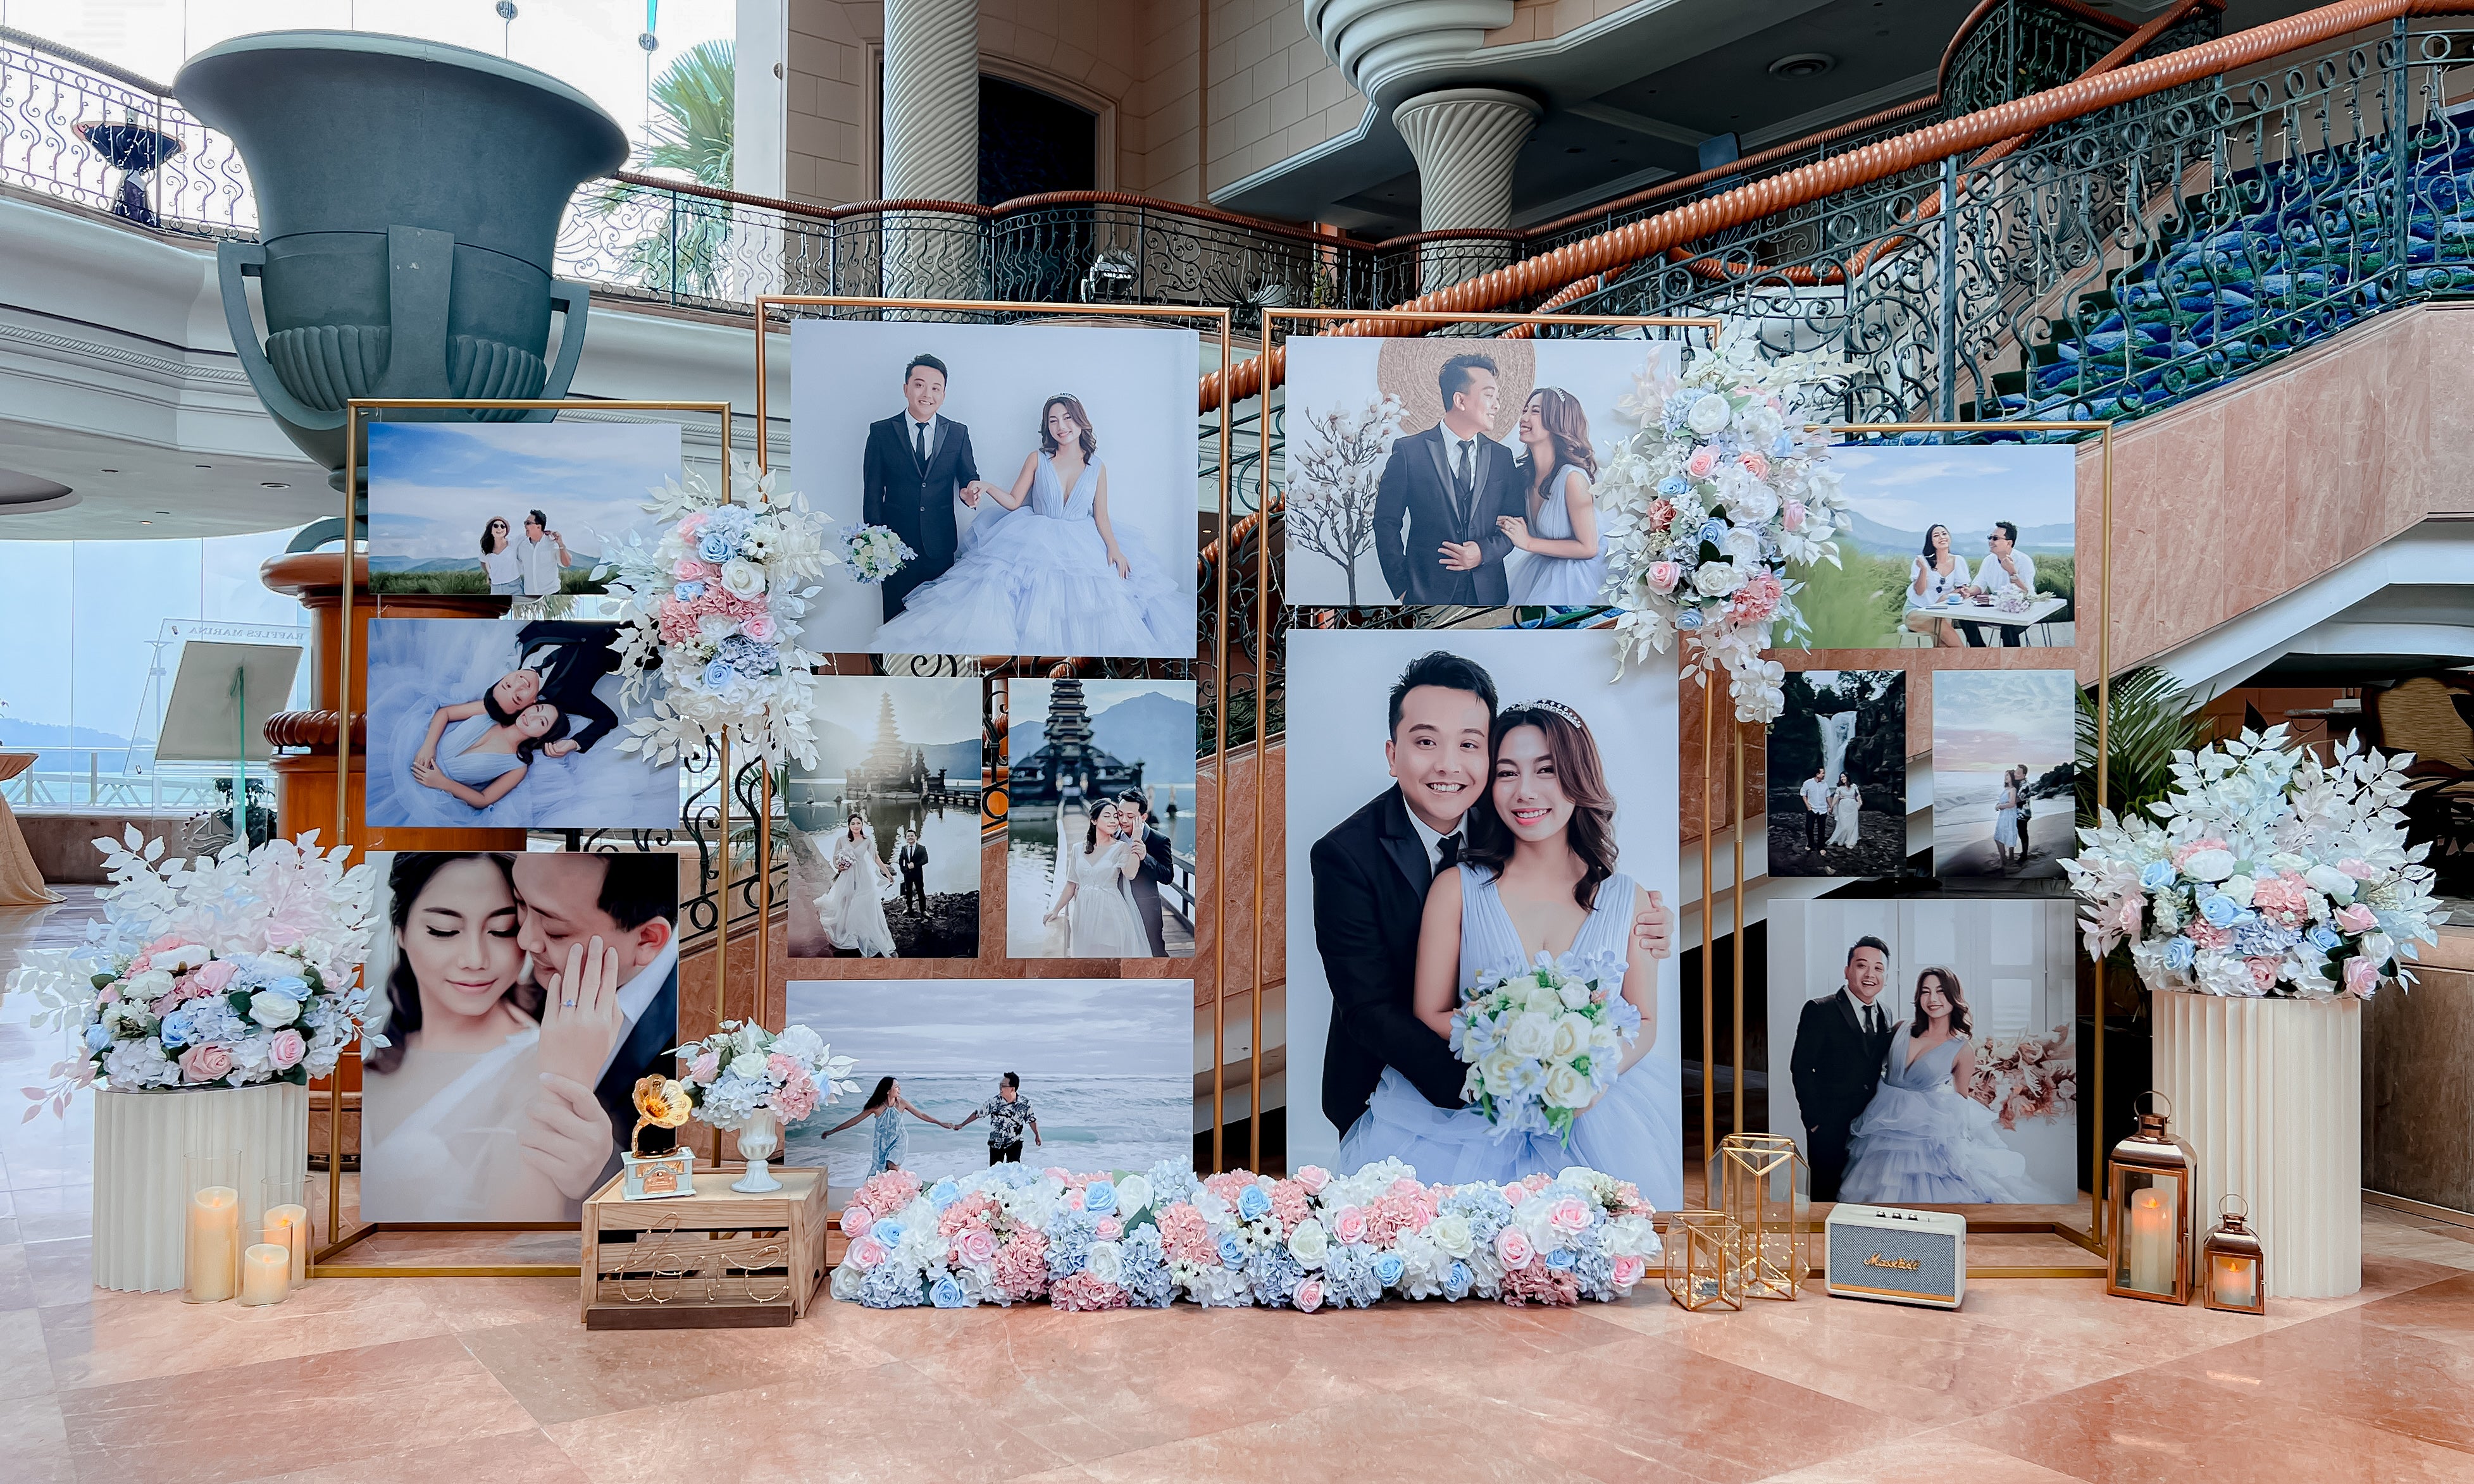 Wedding Reception Decor in Singapore - Multi-stands Photo Gallery with Blue White Pink Florals (Venue: Raffles Marina)